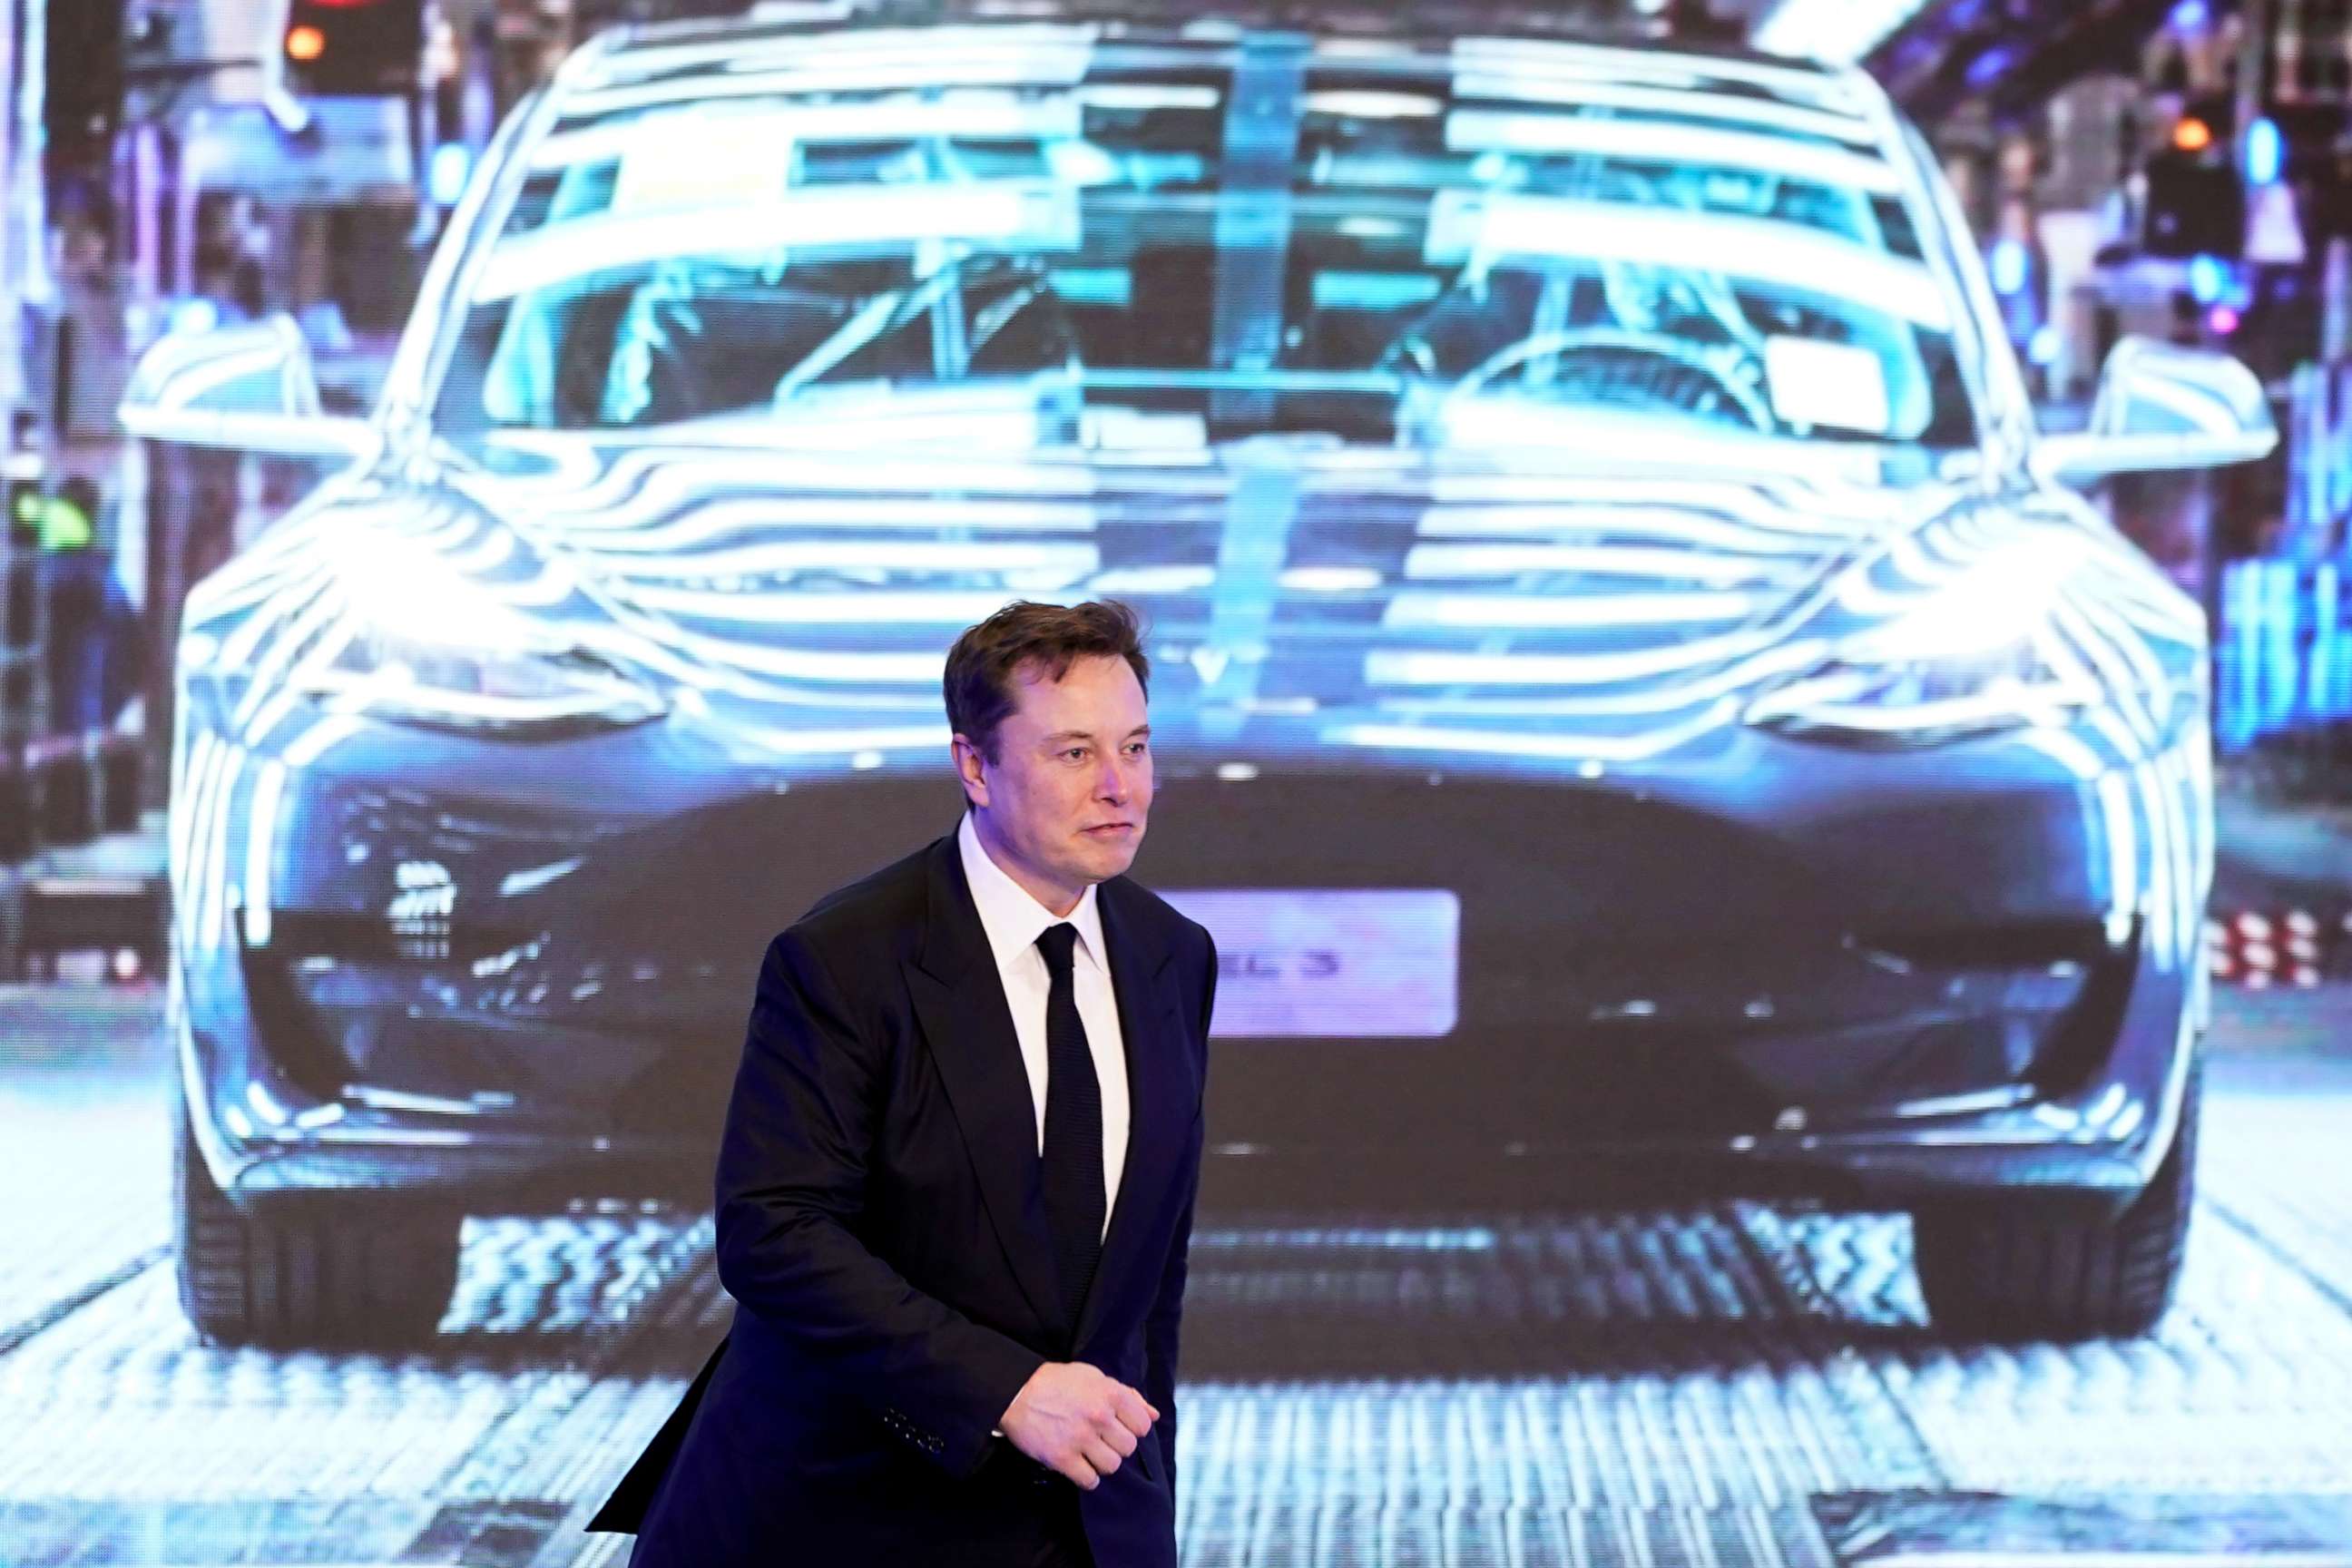 PHOTO: Tesla CEO Elon Musk appears at an event in Shanghai, China, Jan. 7, 2020.